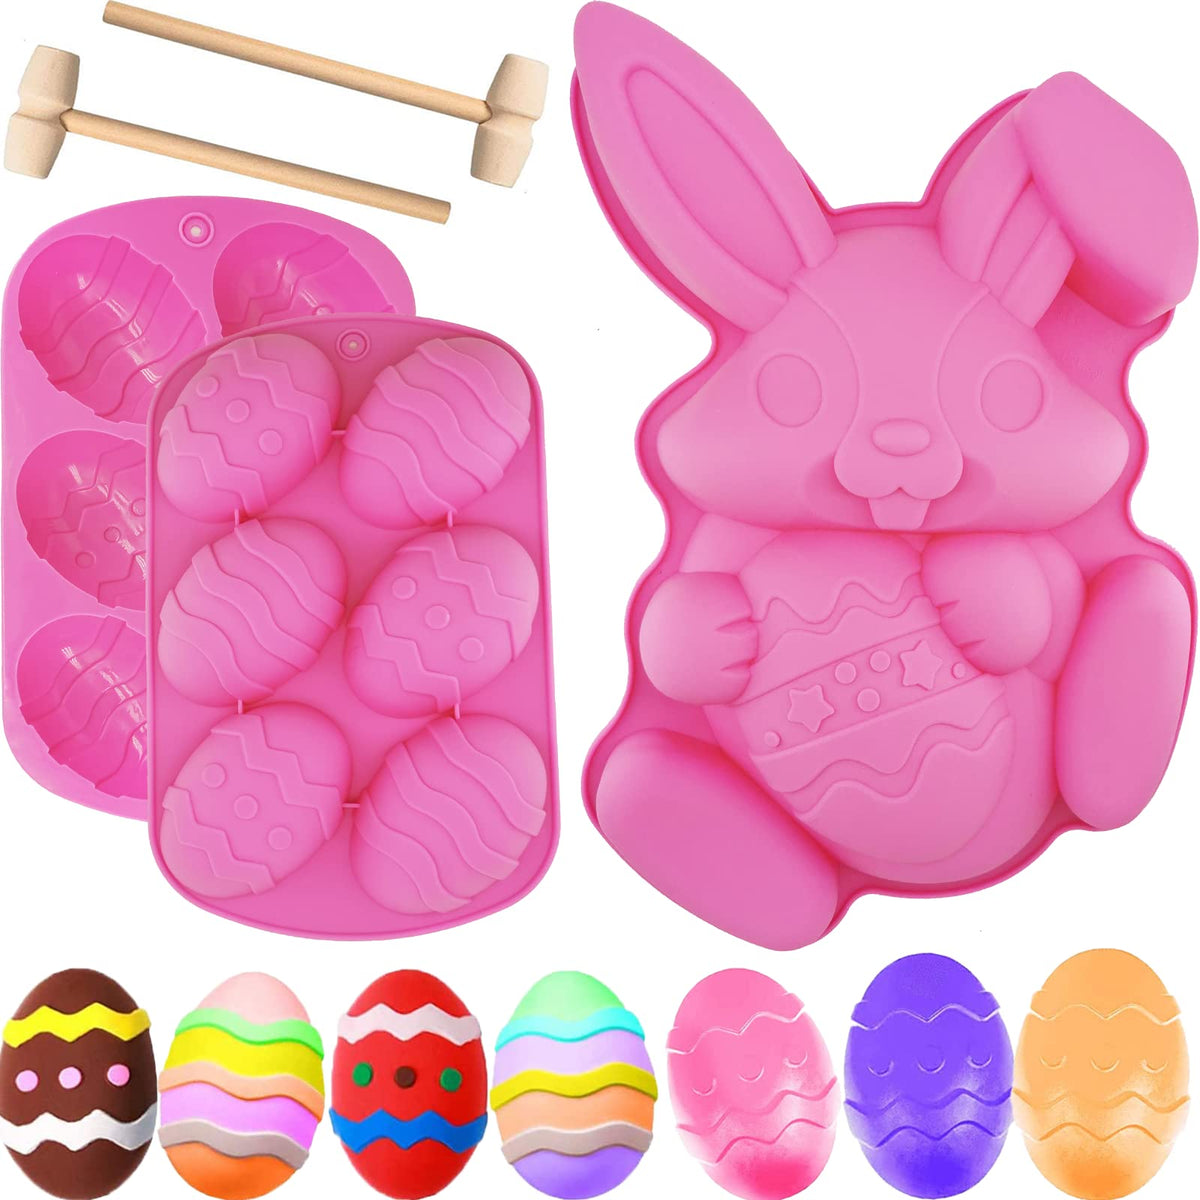 2-Pack Easter Egg and Bunny Mold - MoldFun Giant Easter Silicone